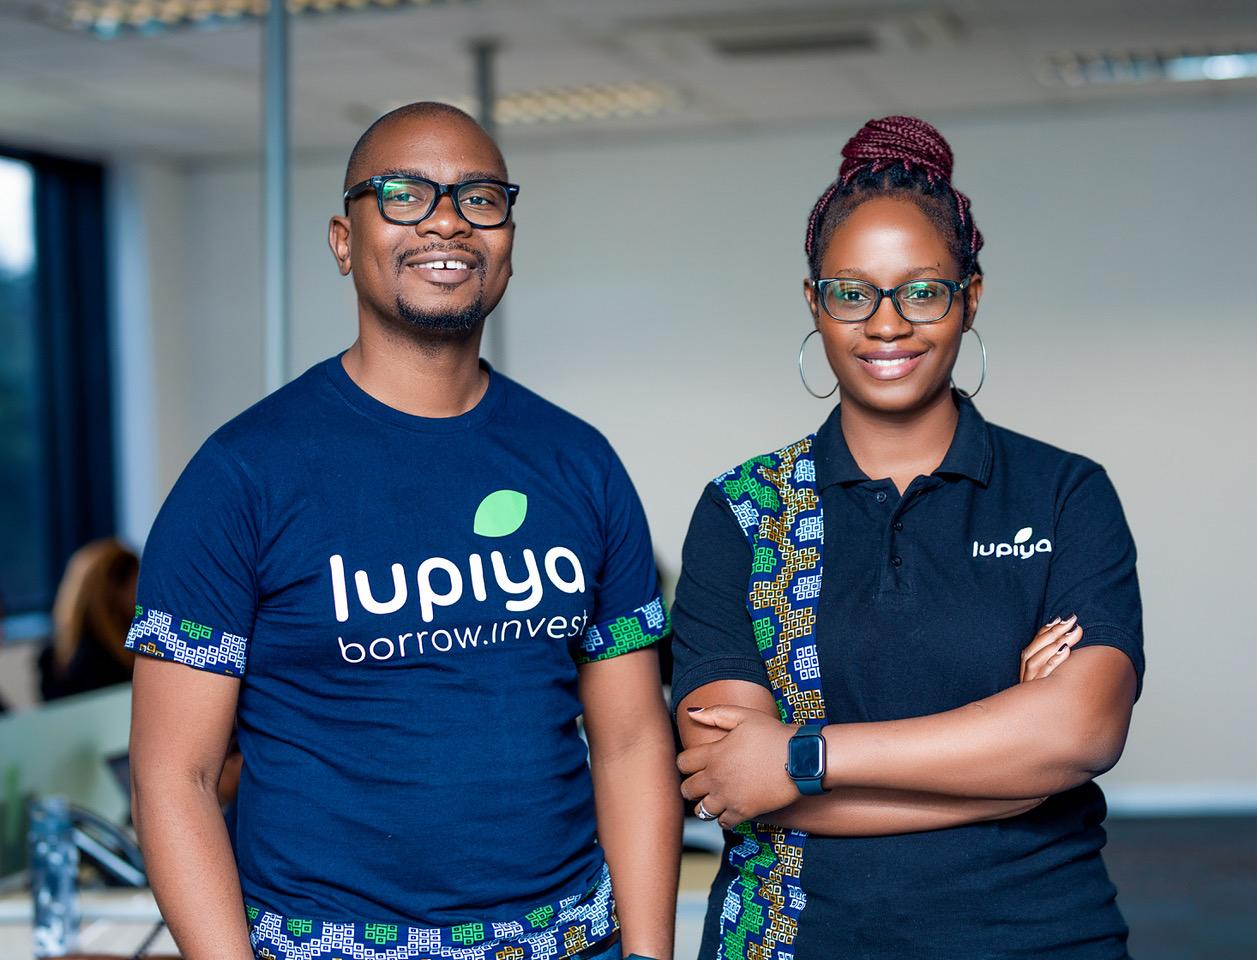 Zambian Neobank Lupiya Raises $8.25M in Series A Funding to Expand Financial Inclusion 🇿🇲